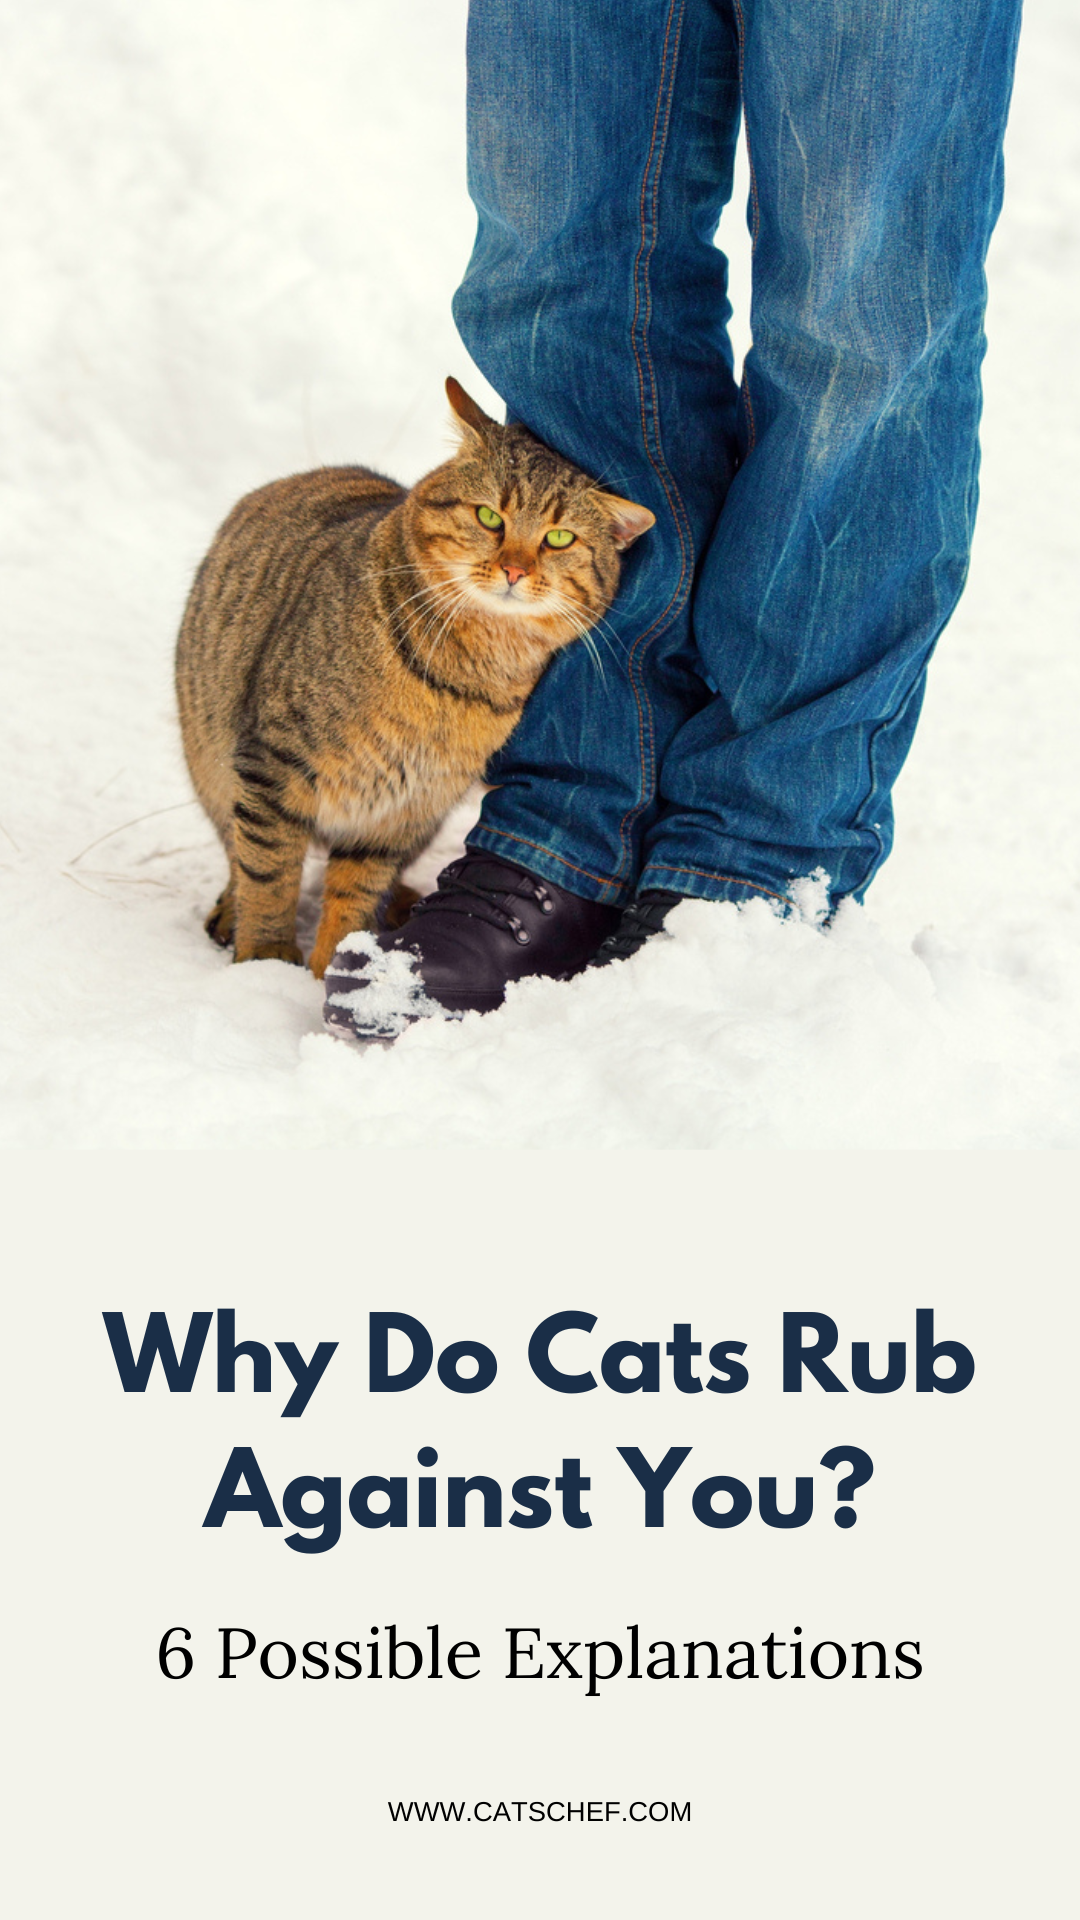 Why Do Cats Rub Against You? 6 Possible Explanations